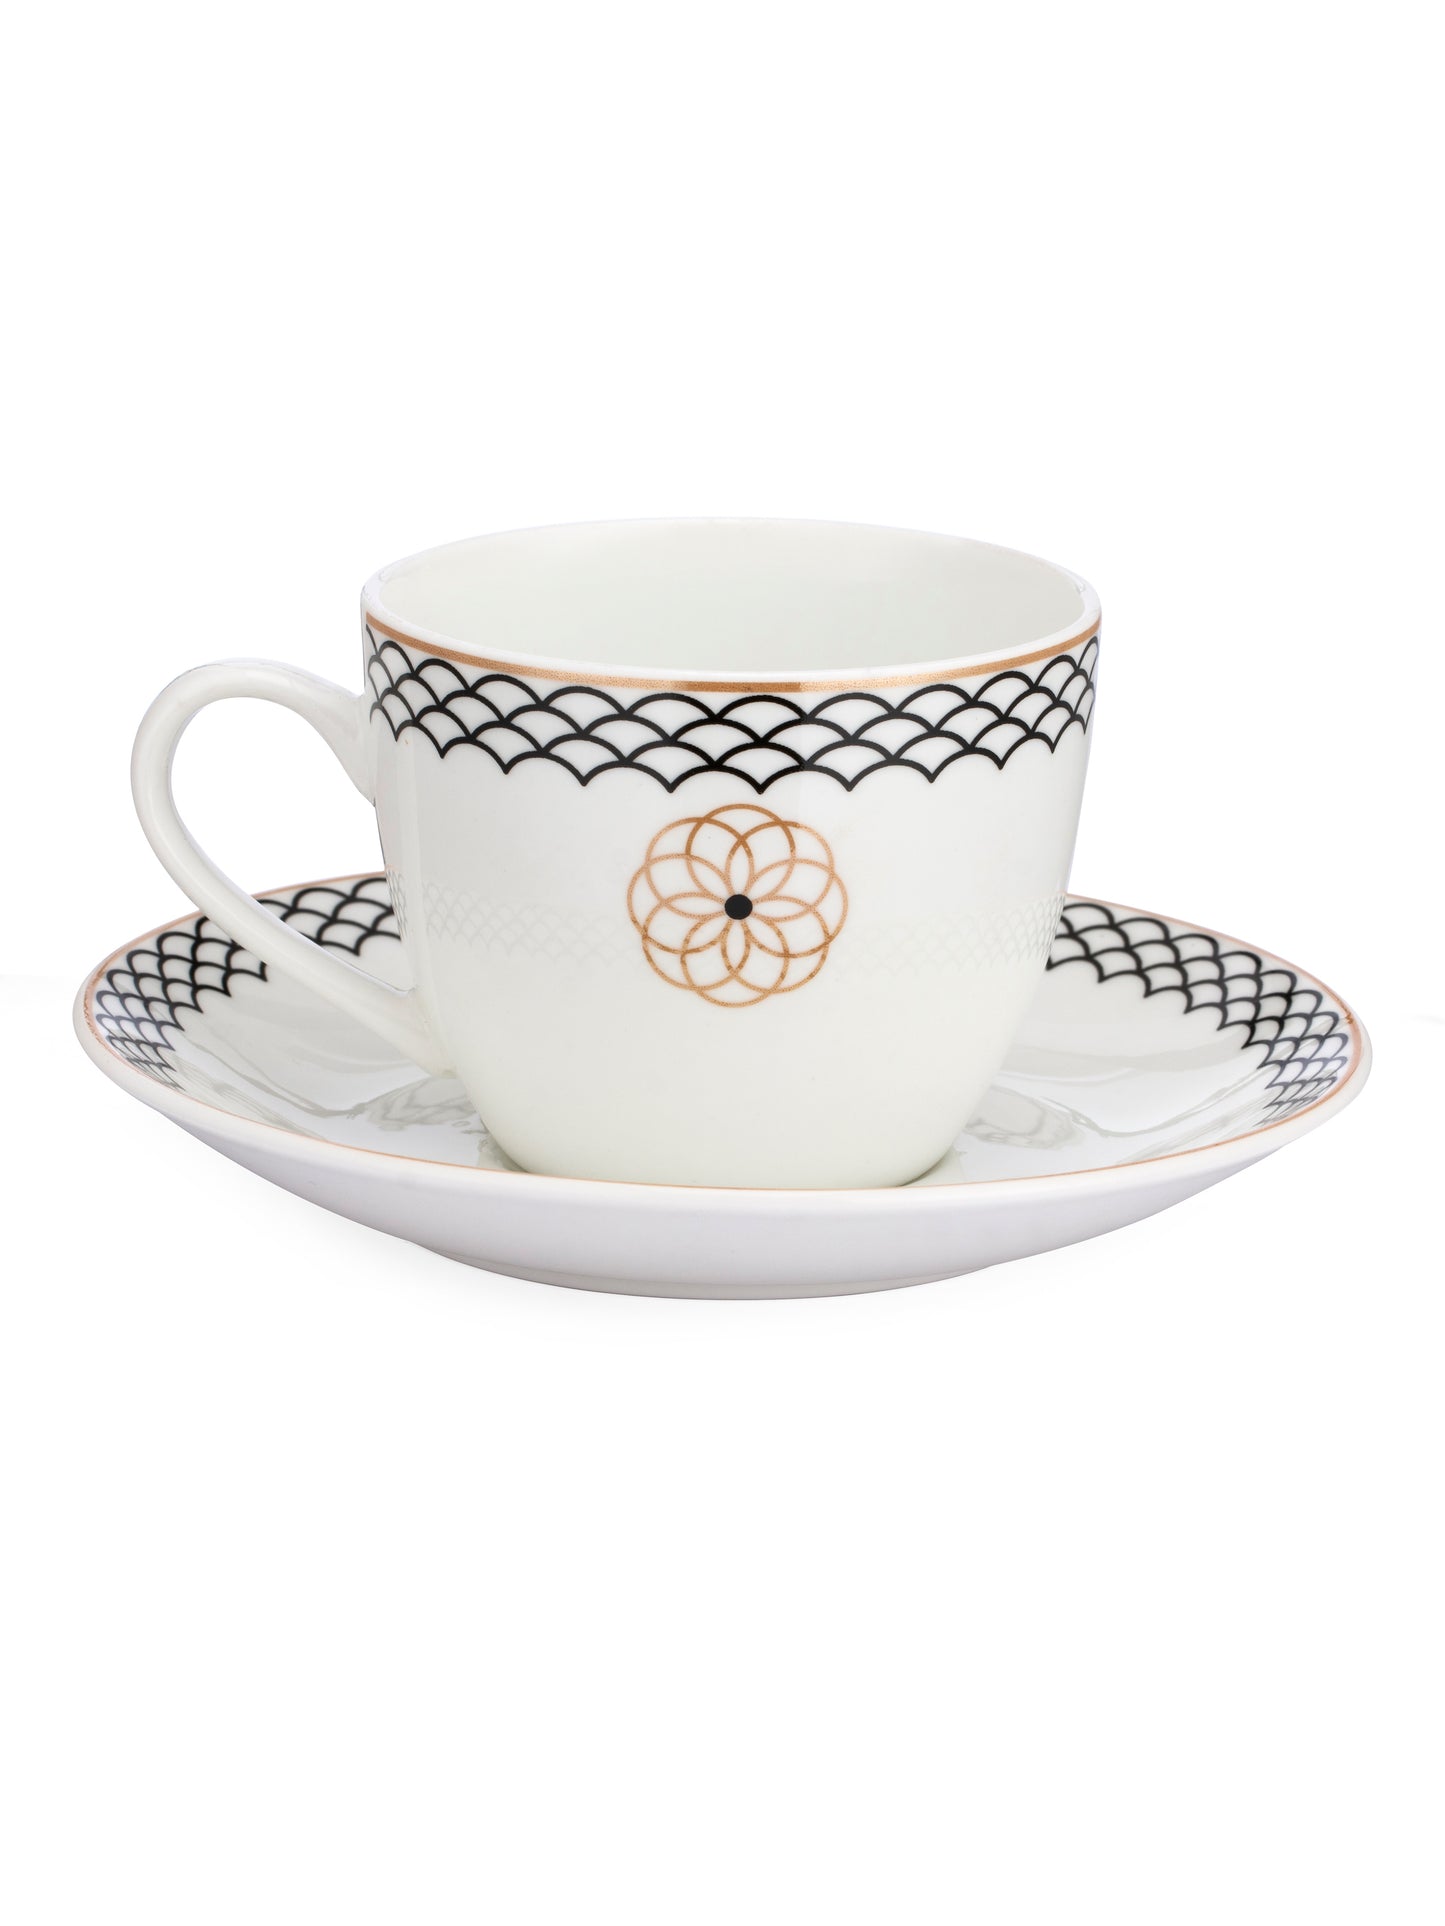 Cream Super Cup & Saucer, 210ml, Set of 12 (6 Cups + 6 Saucers) (S301)